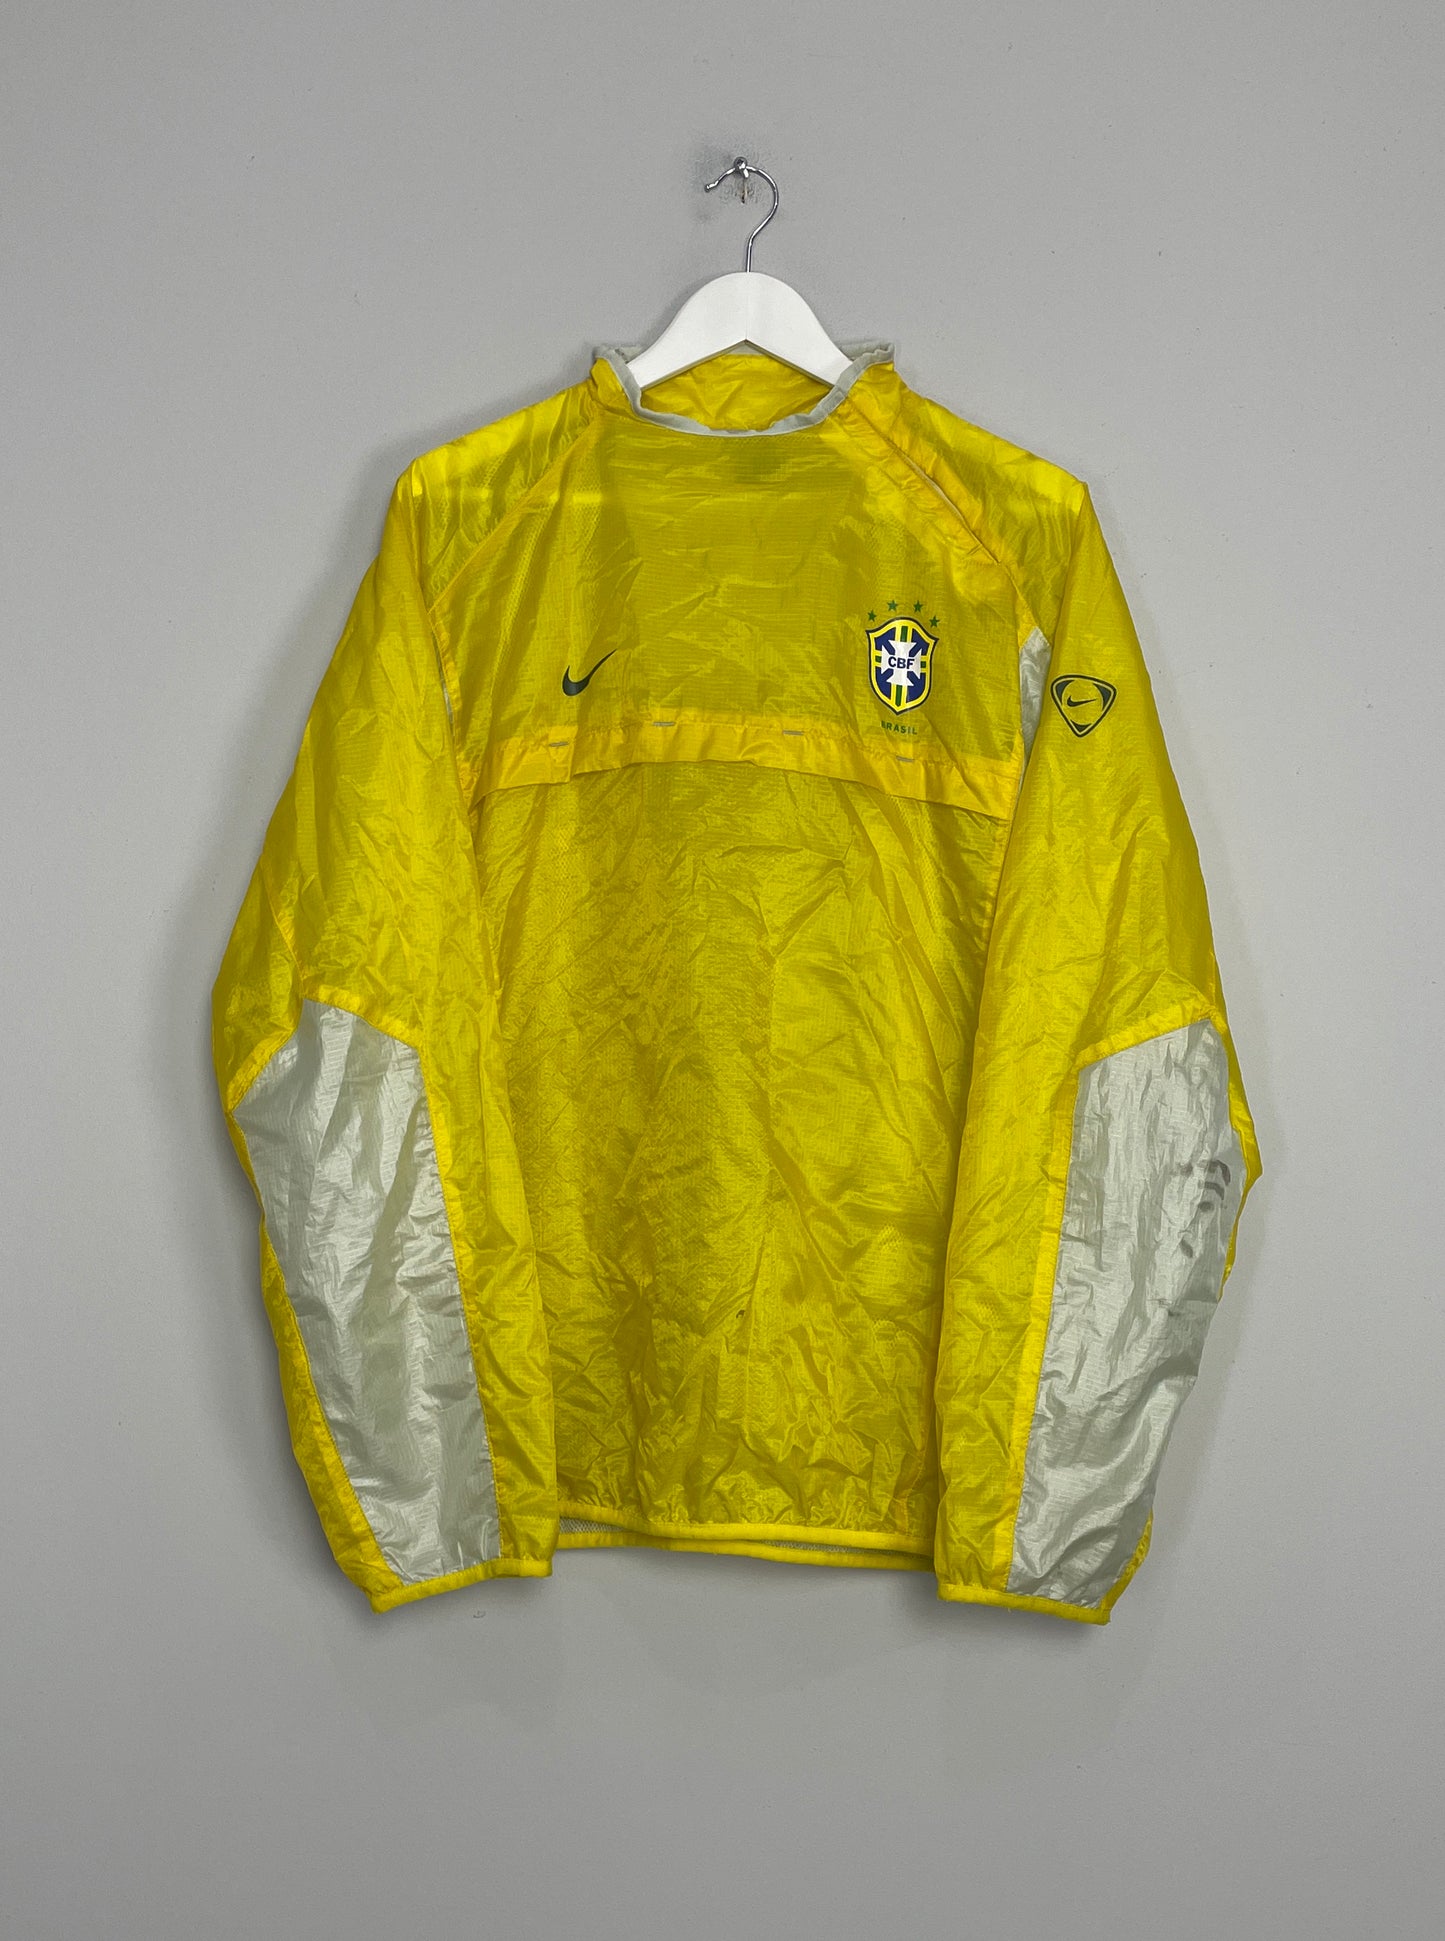 Image of the Brazil jacket from the 2002/03 season